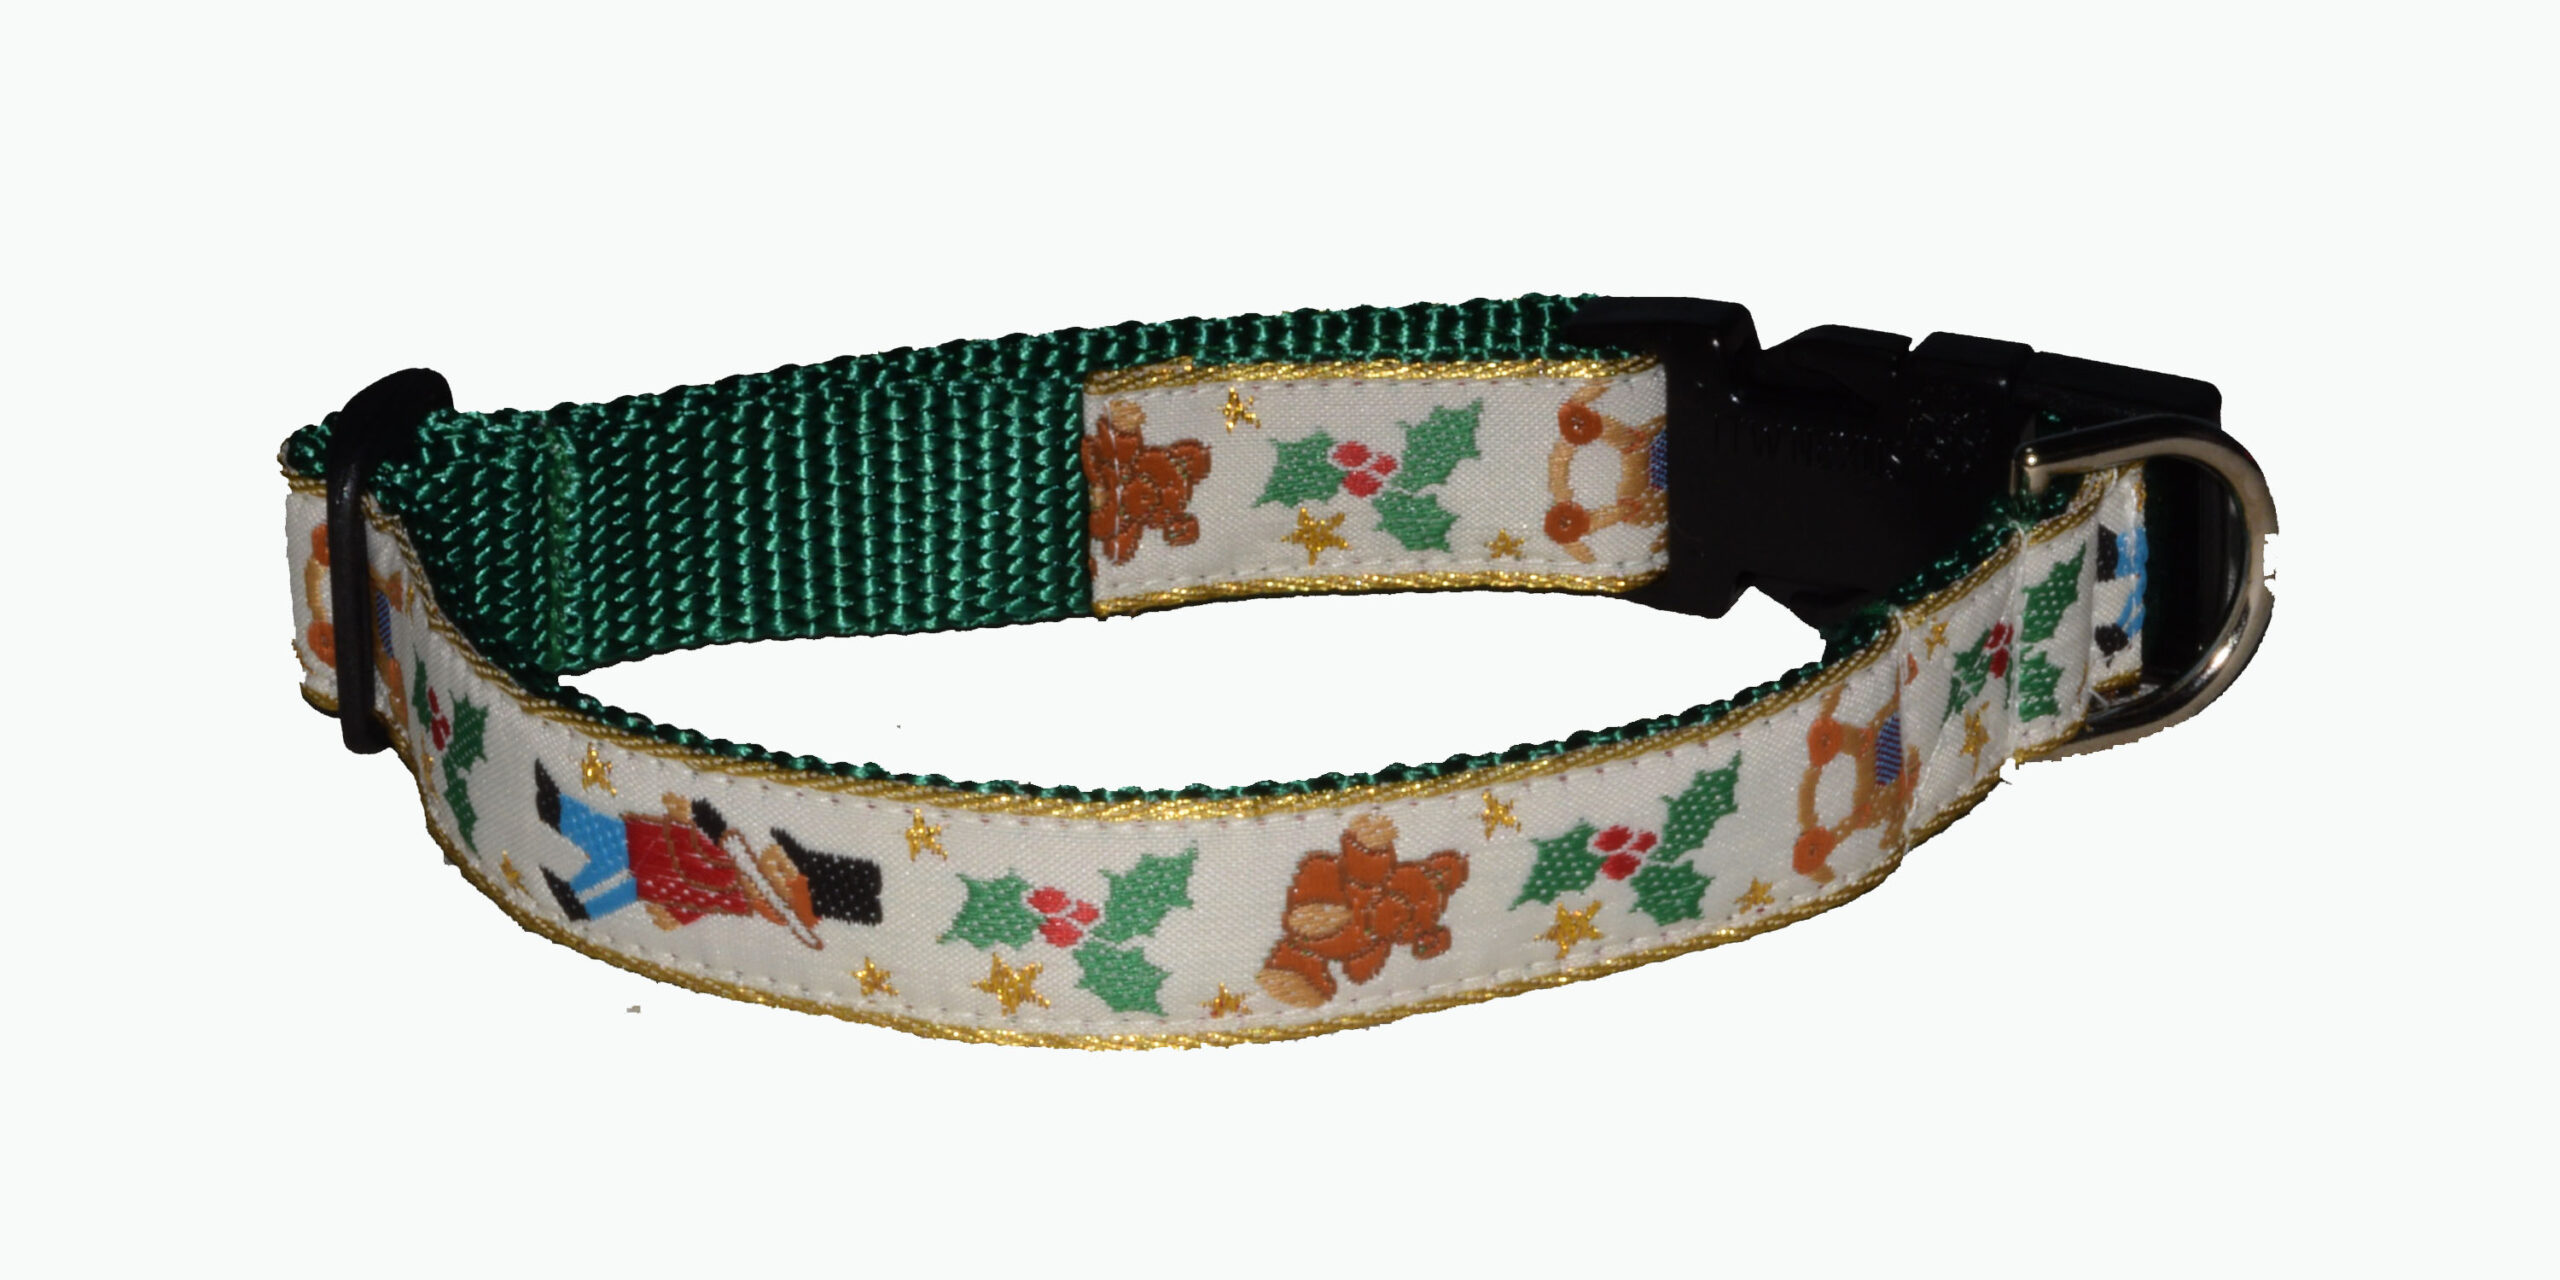 Toy Soldiers Wholesale Dog Collars